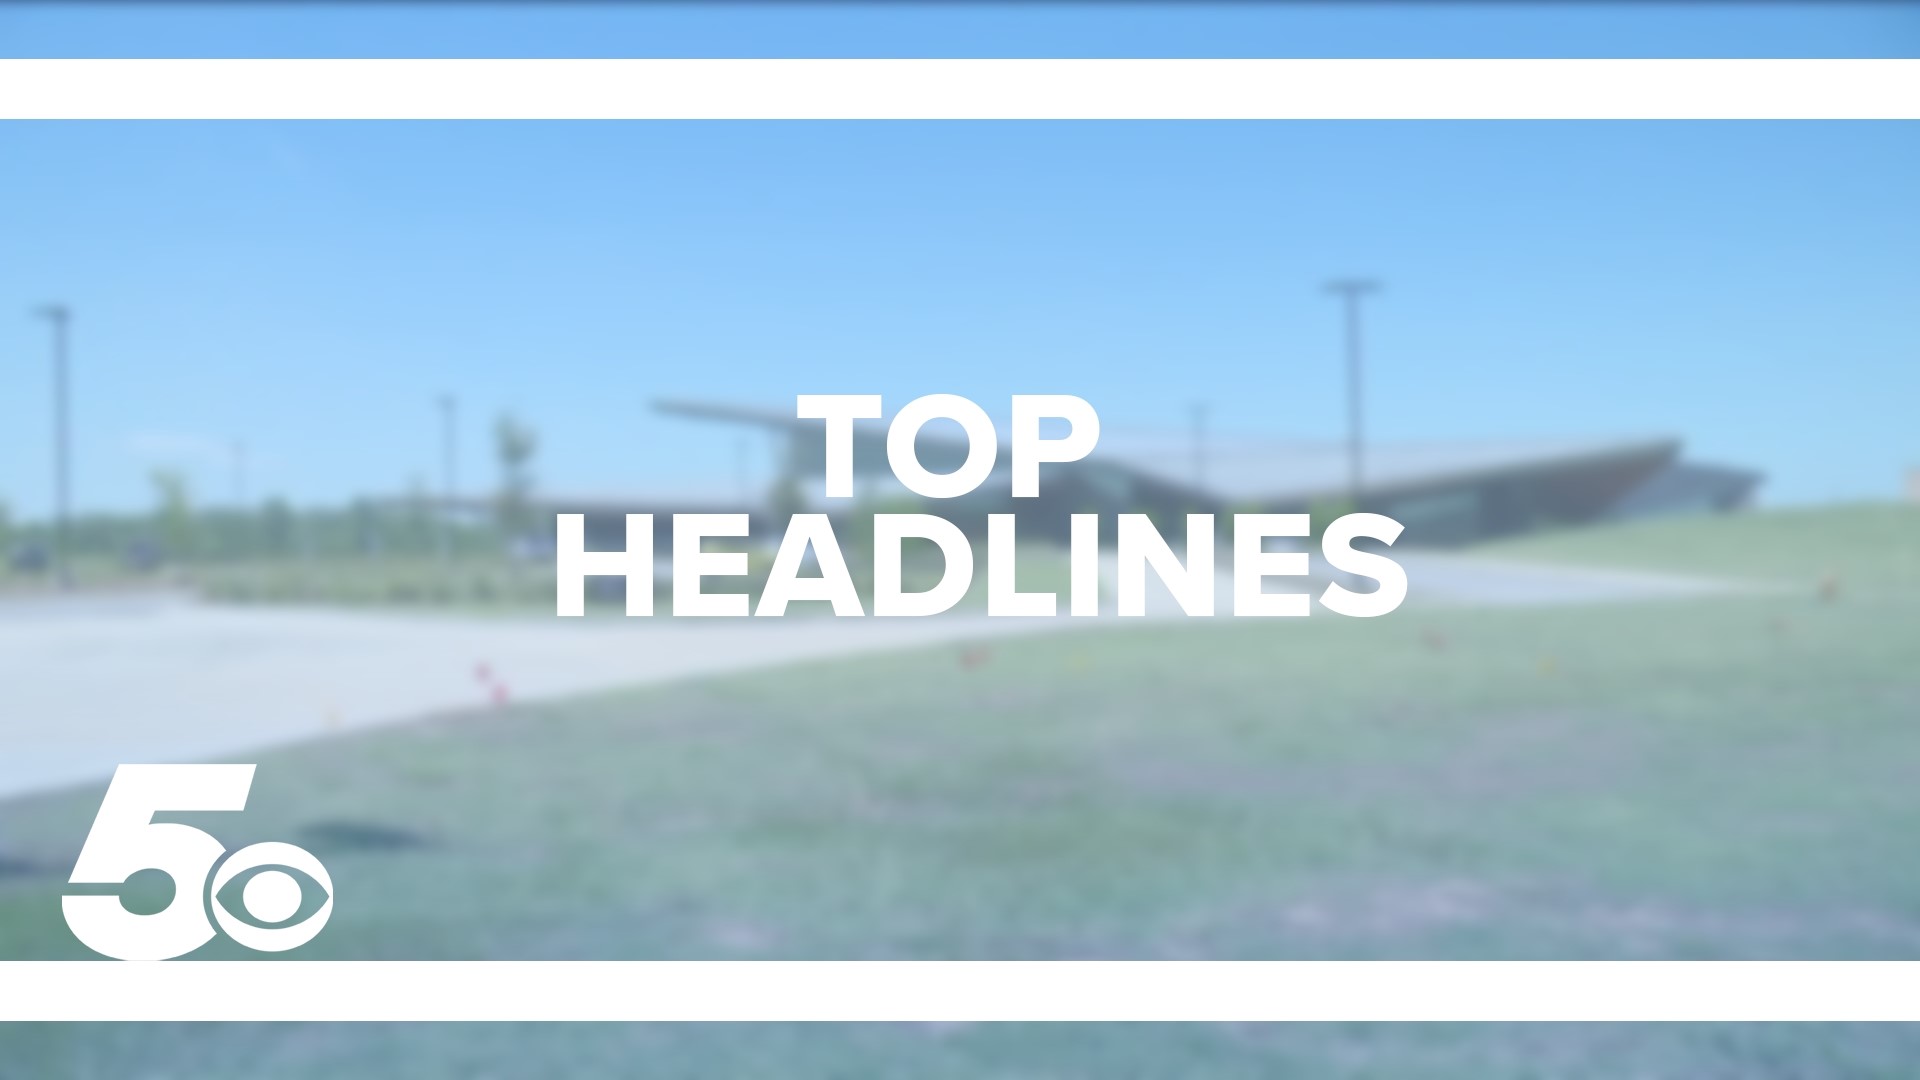 Check out today's top headlines including weather, land for a new children's museum, and more!